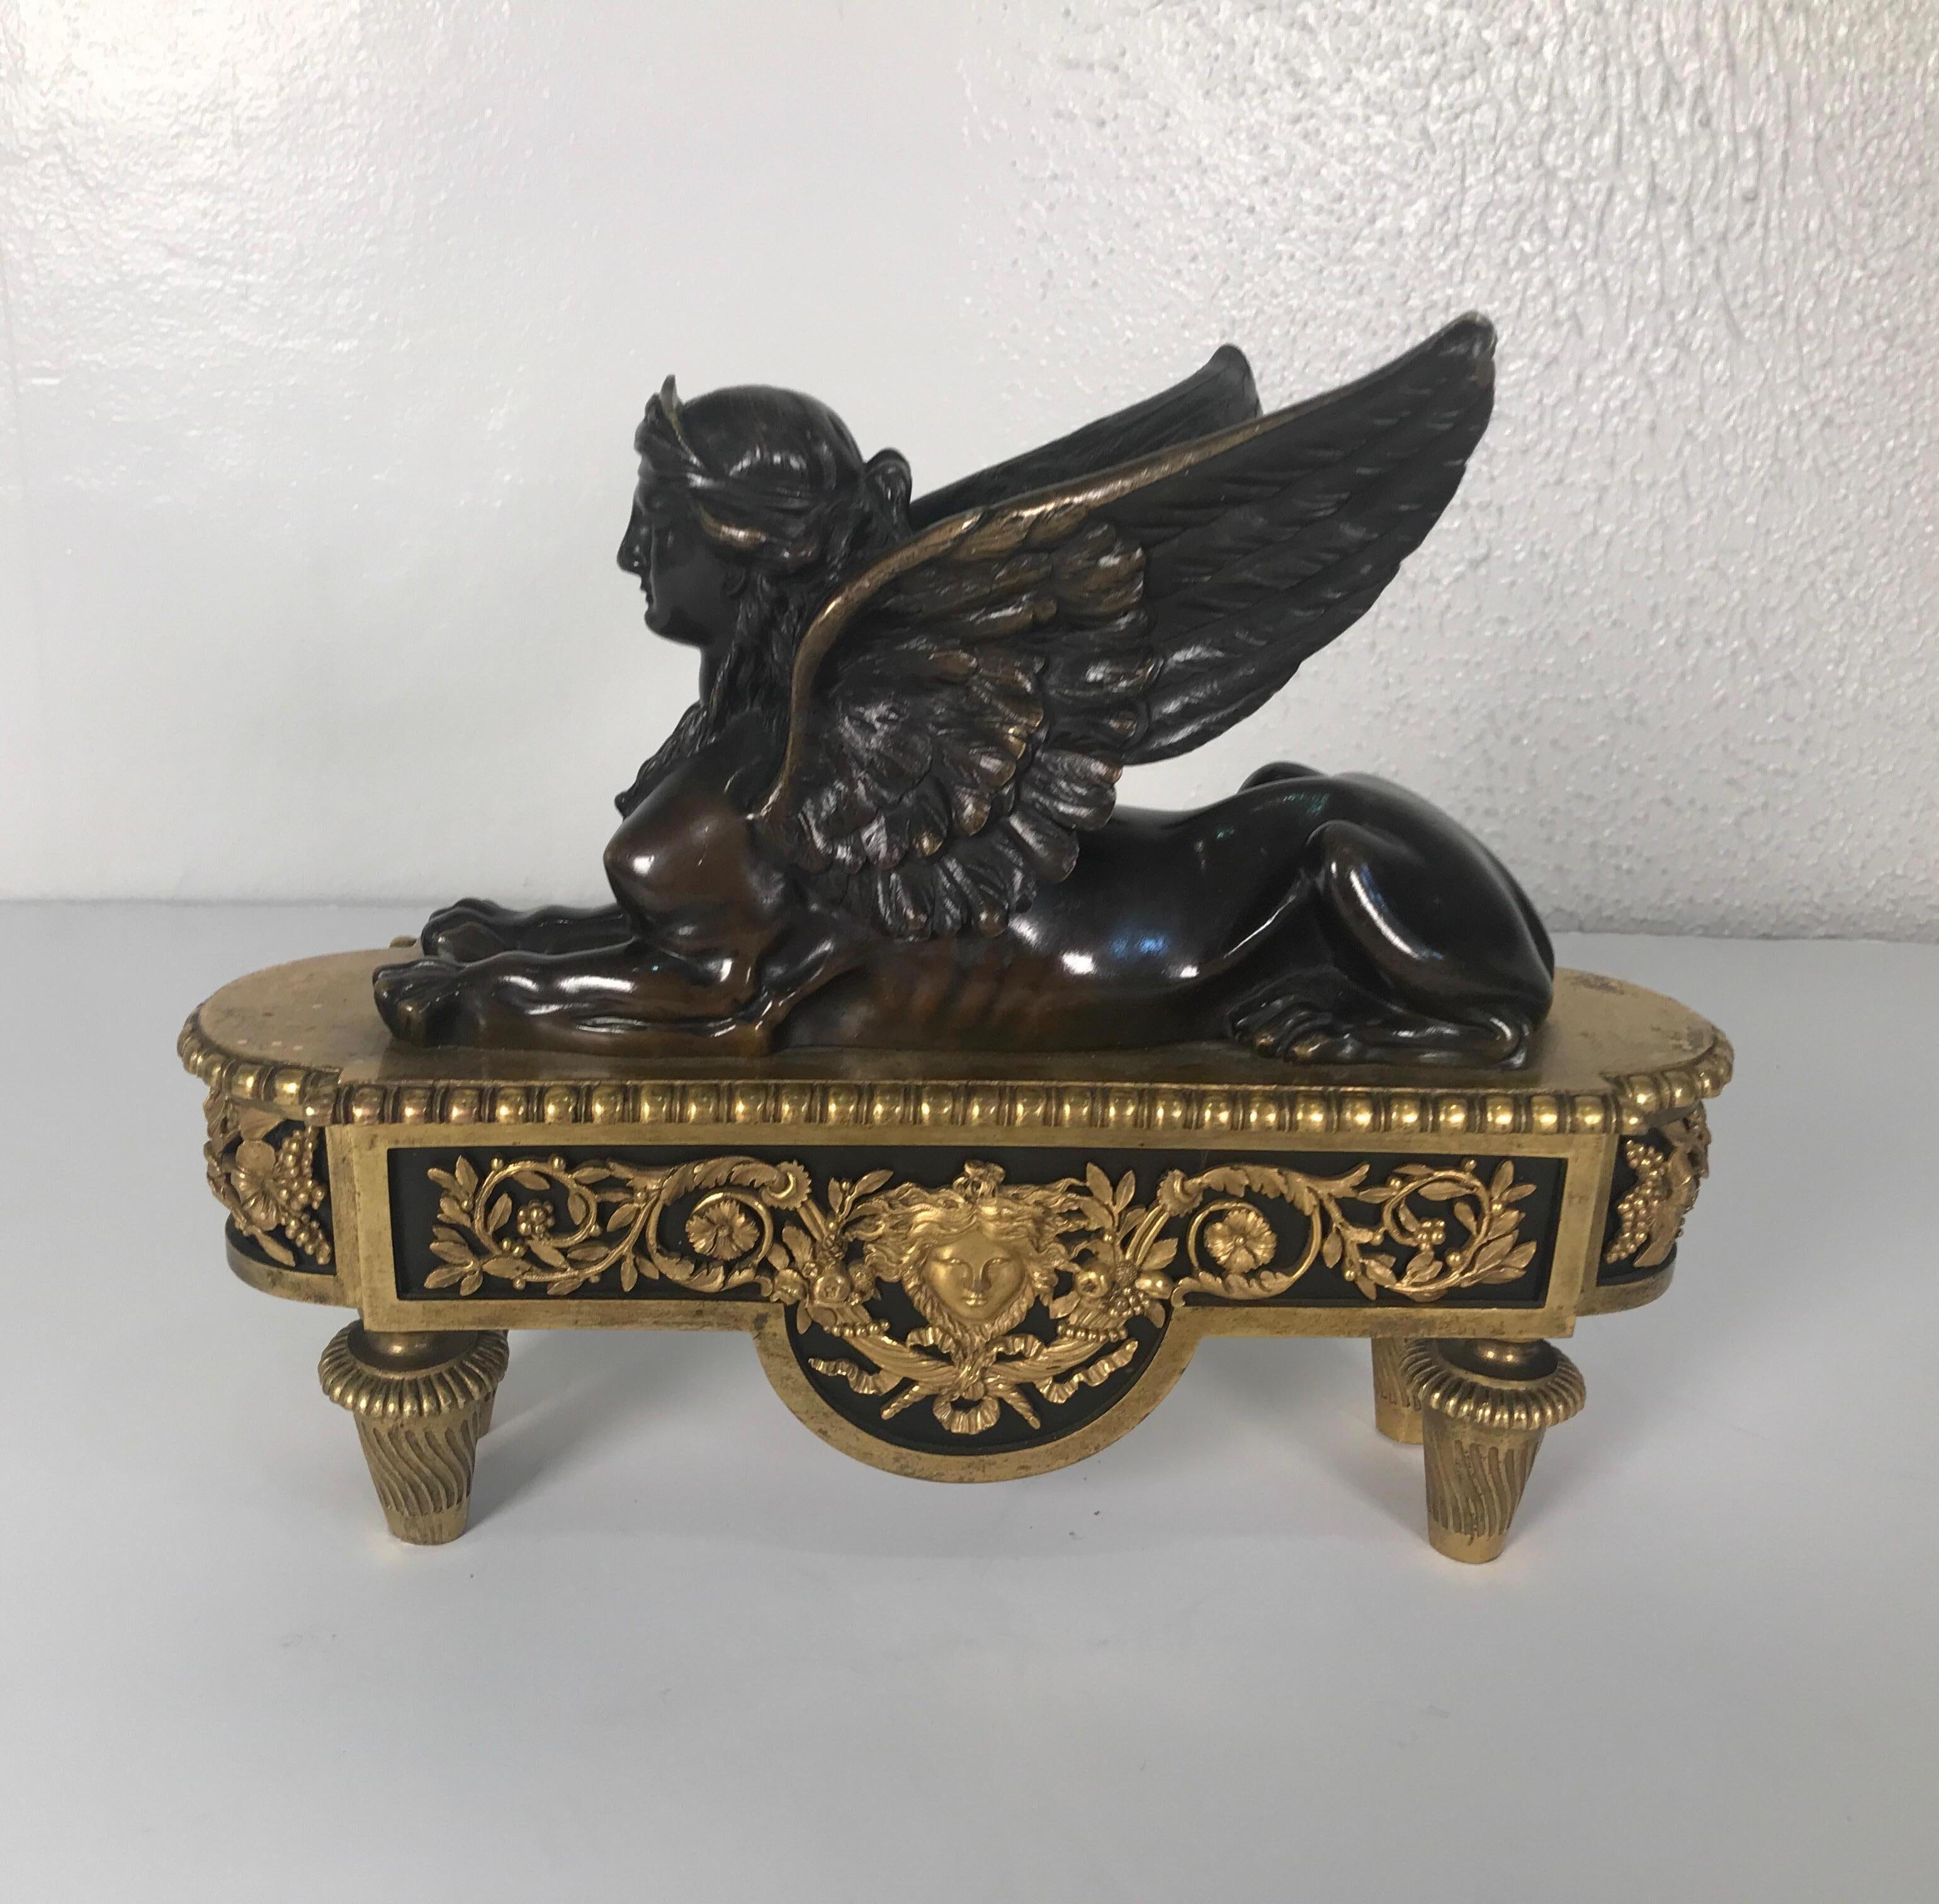 Beautifully cast French Empire patinated and gilt bronze winged sphinx. The original dark warm patination with original gilt base. The underside showing the handcut blots that date this to circa 1840-1850.